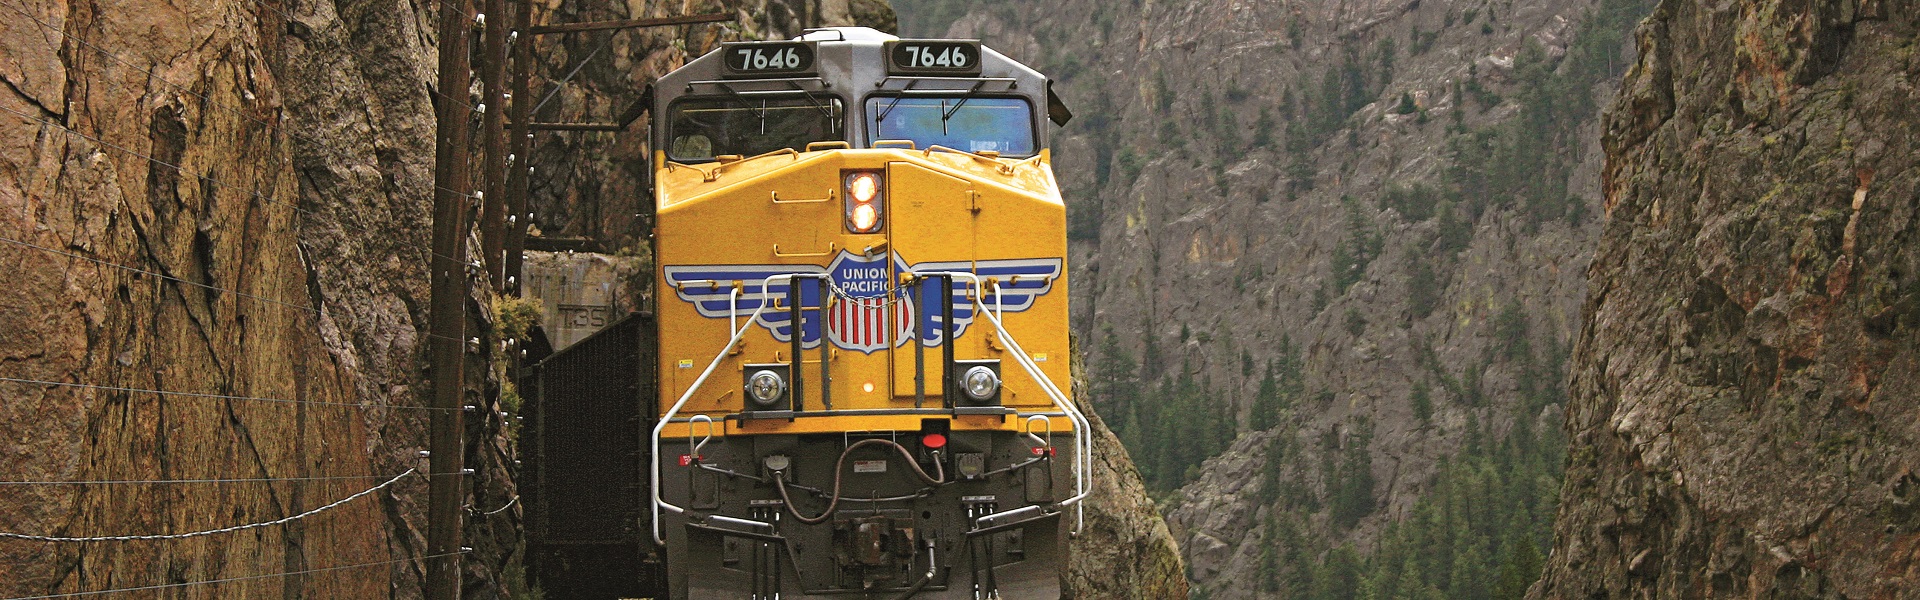 Union Pacific train in the mountains